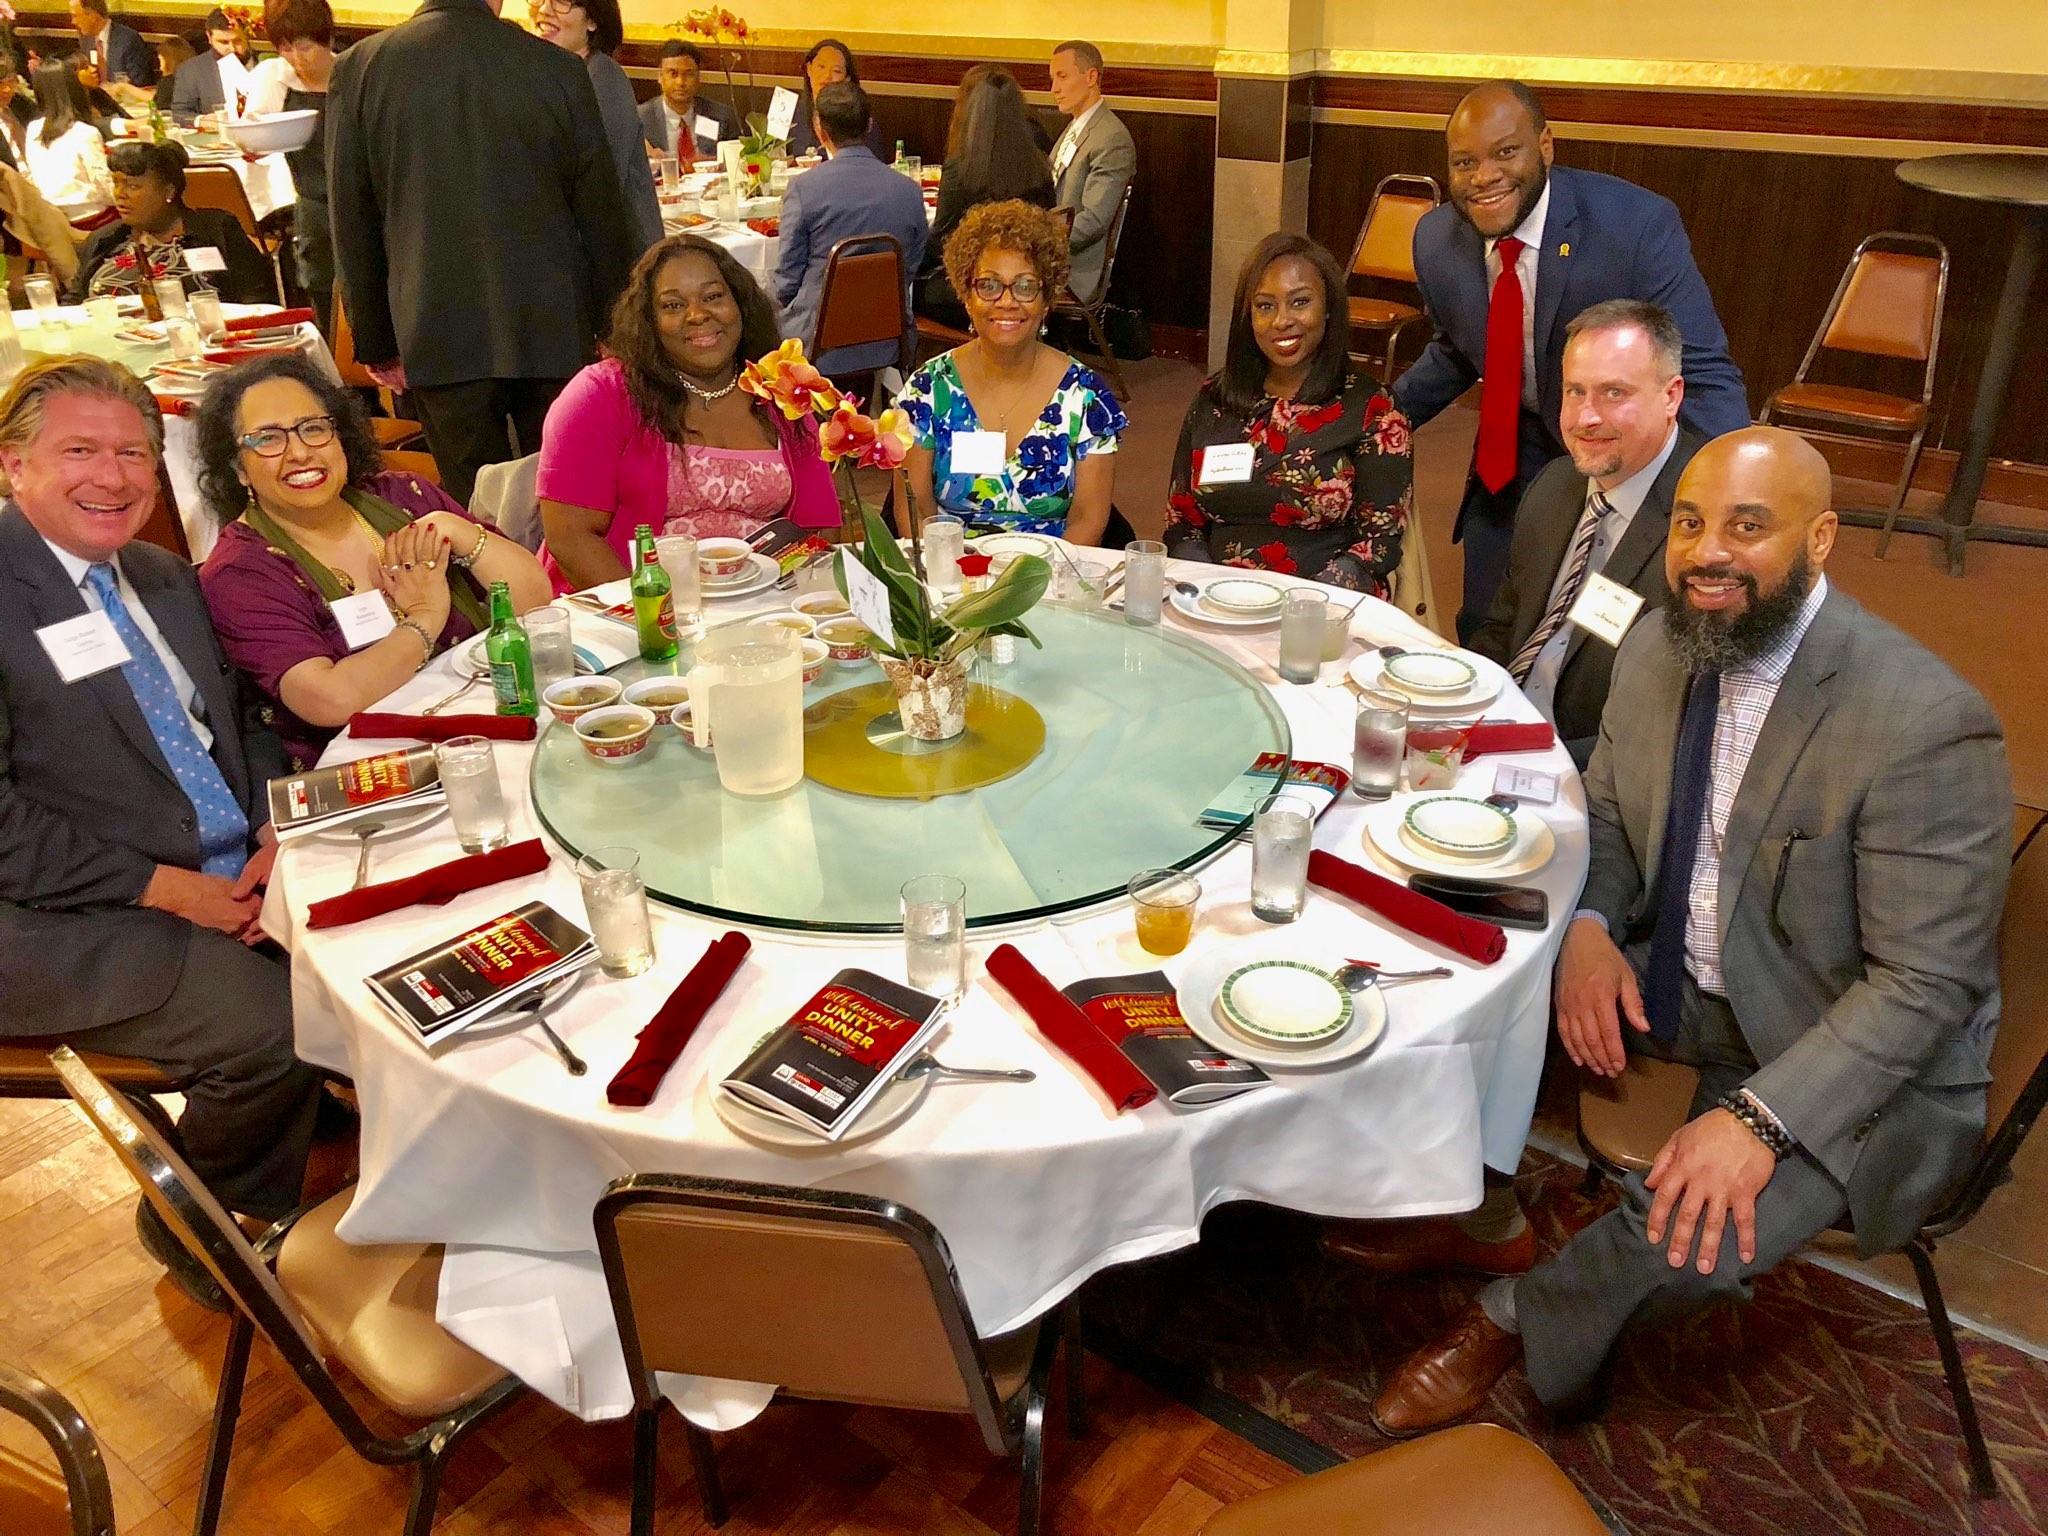 Group of men and women, including HeplerBroom attorney Eric Hall, sitting around a round table at the Annual Unity Dinner